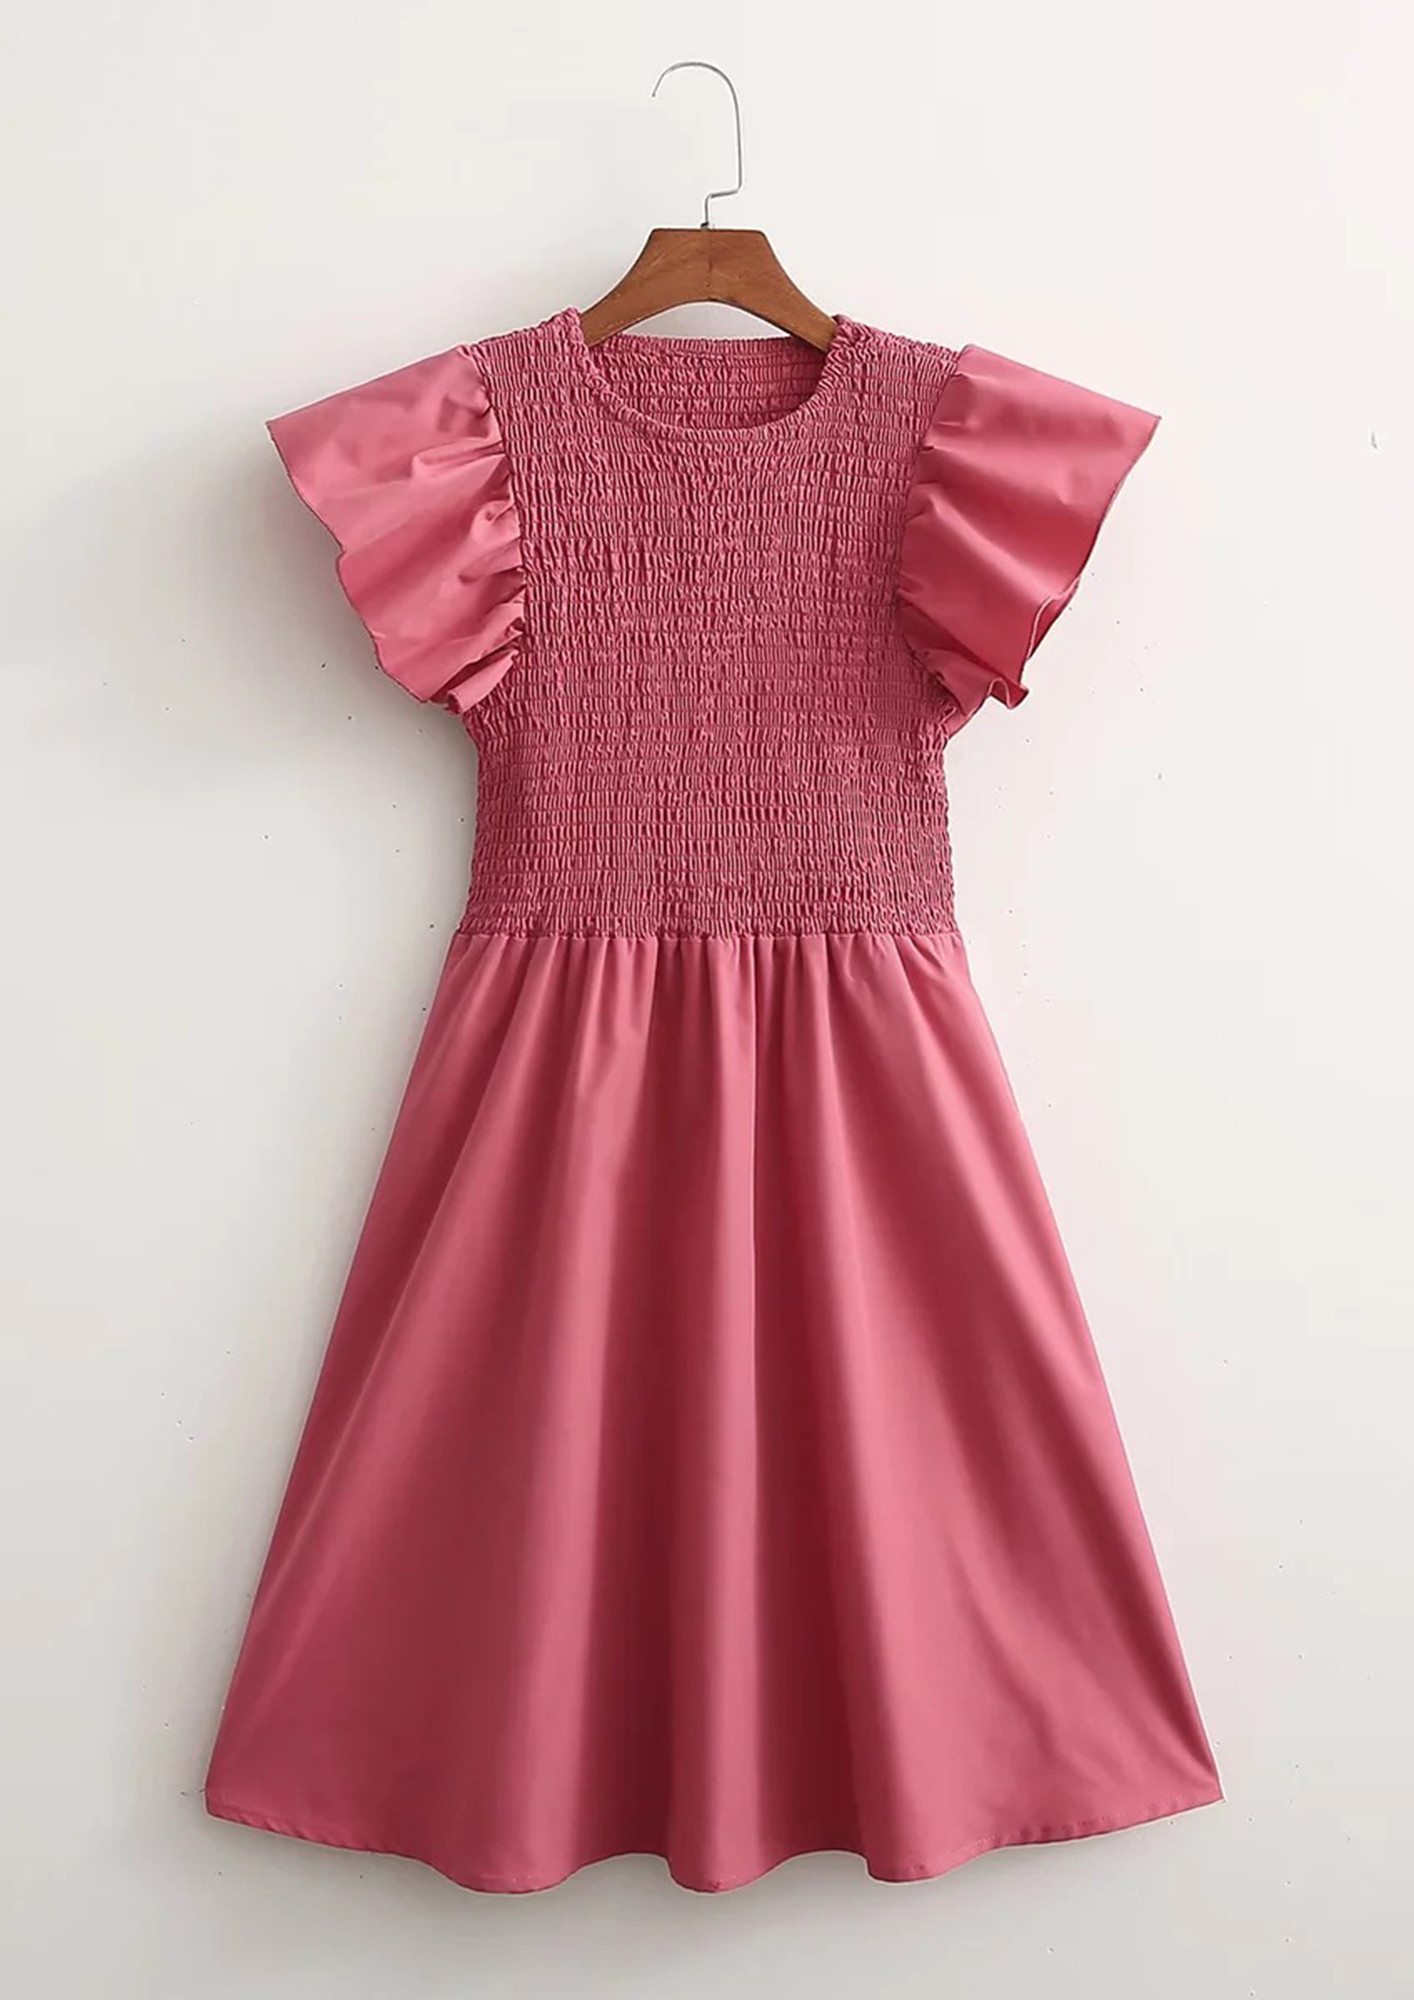 FLUSHED WITH HAPPINESS PINK DRESS